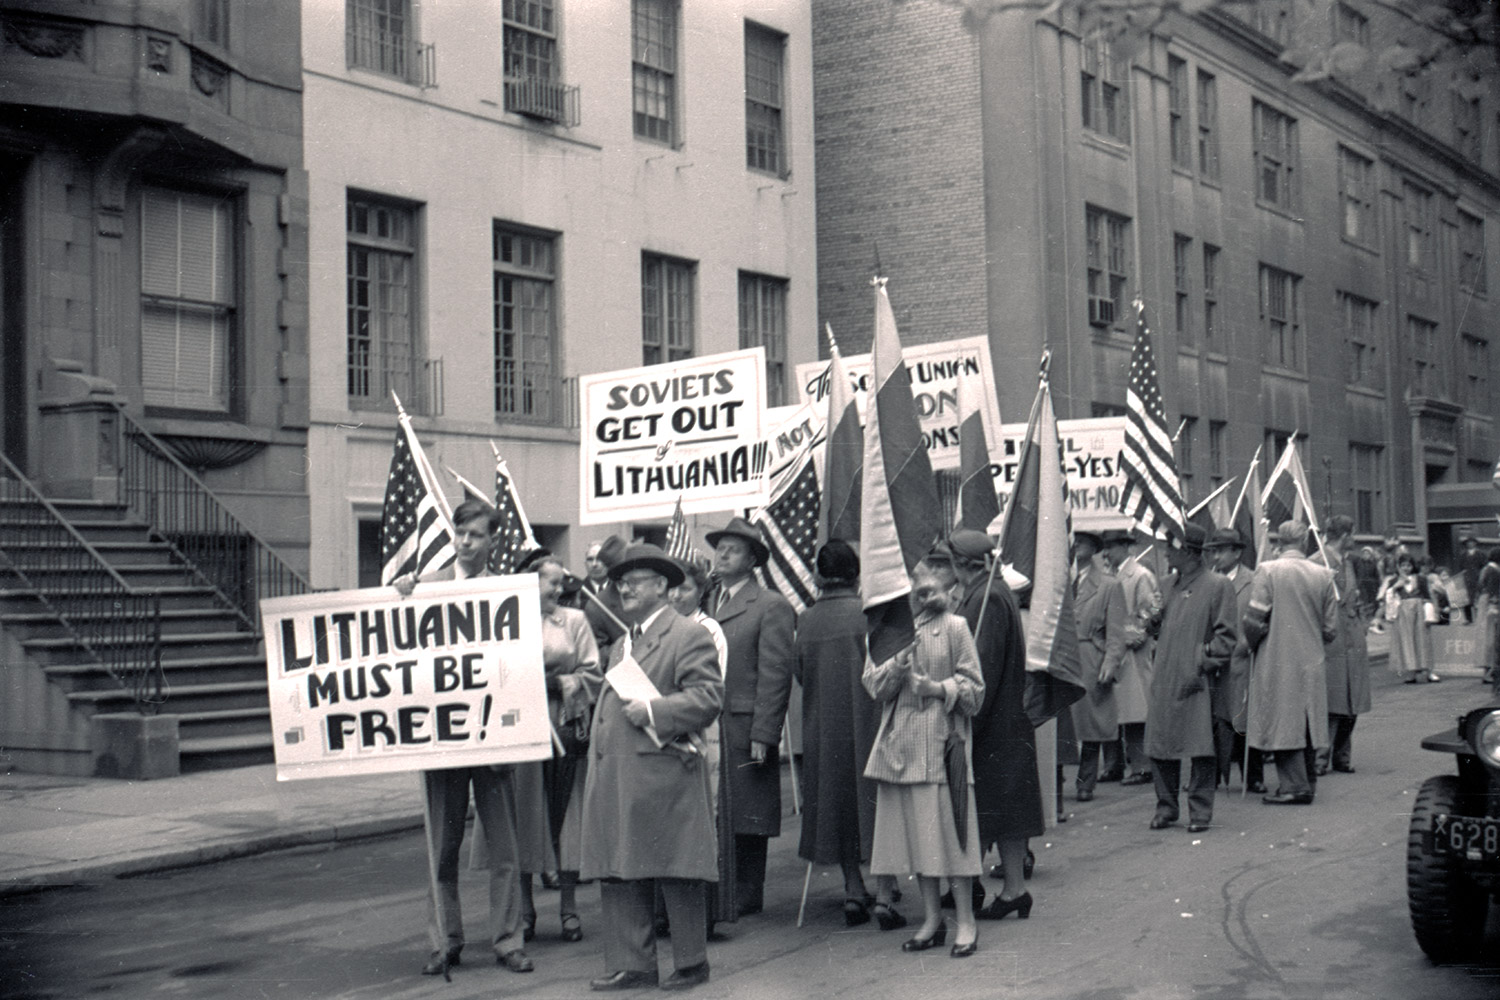 1953 – New York, USA. A group from the Lithuanian American community protests against the Molotov-Ribbentrop Pact and the occupation/annexation of Lithuania, at the Loyalty Day parade. They carry 14 Lithuanian and 14 US flags. In the first row, Kęstutis Trimakas, a member of the Lithuanian National Union of Students (LSS), hold a poster. LVCA, photographer: G. Penikas.